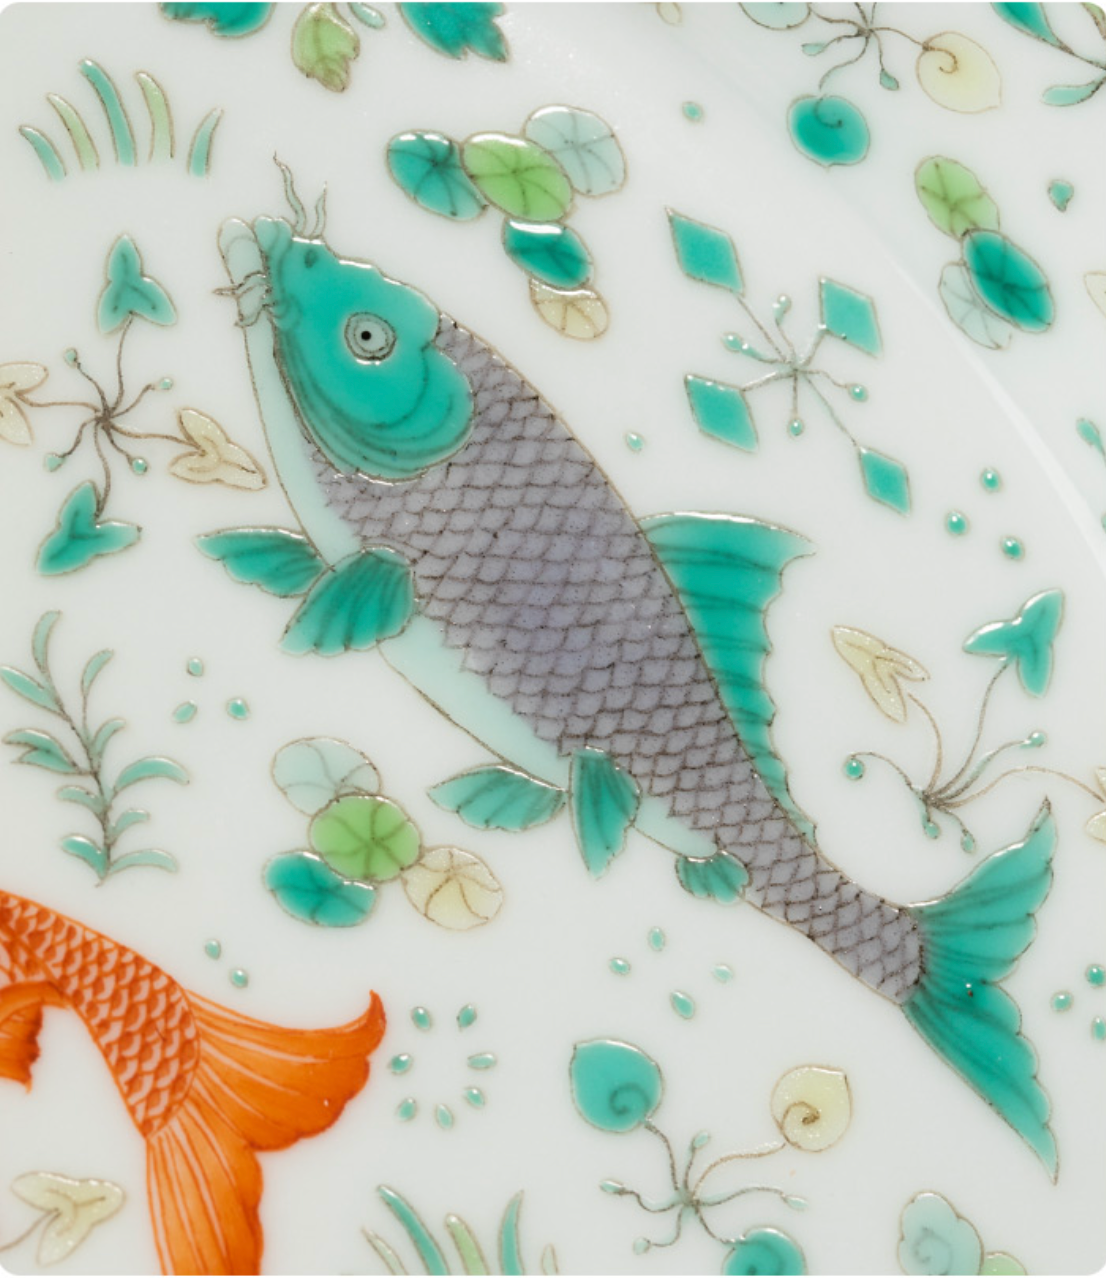 Jingdezhen Turquoise Green And Fish Pallet - Morrow Land